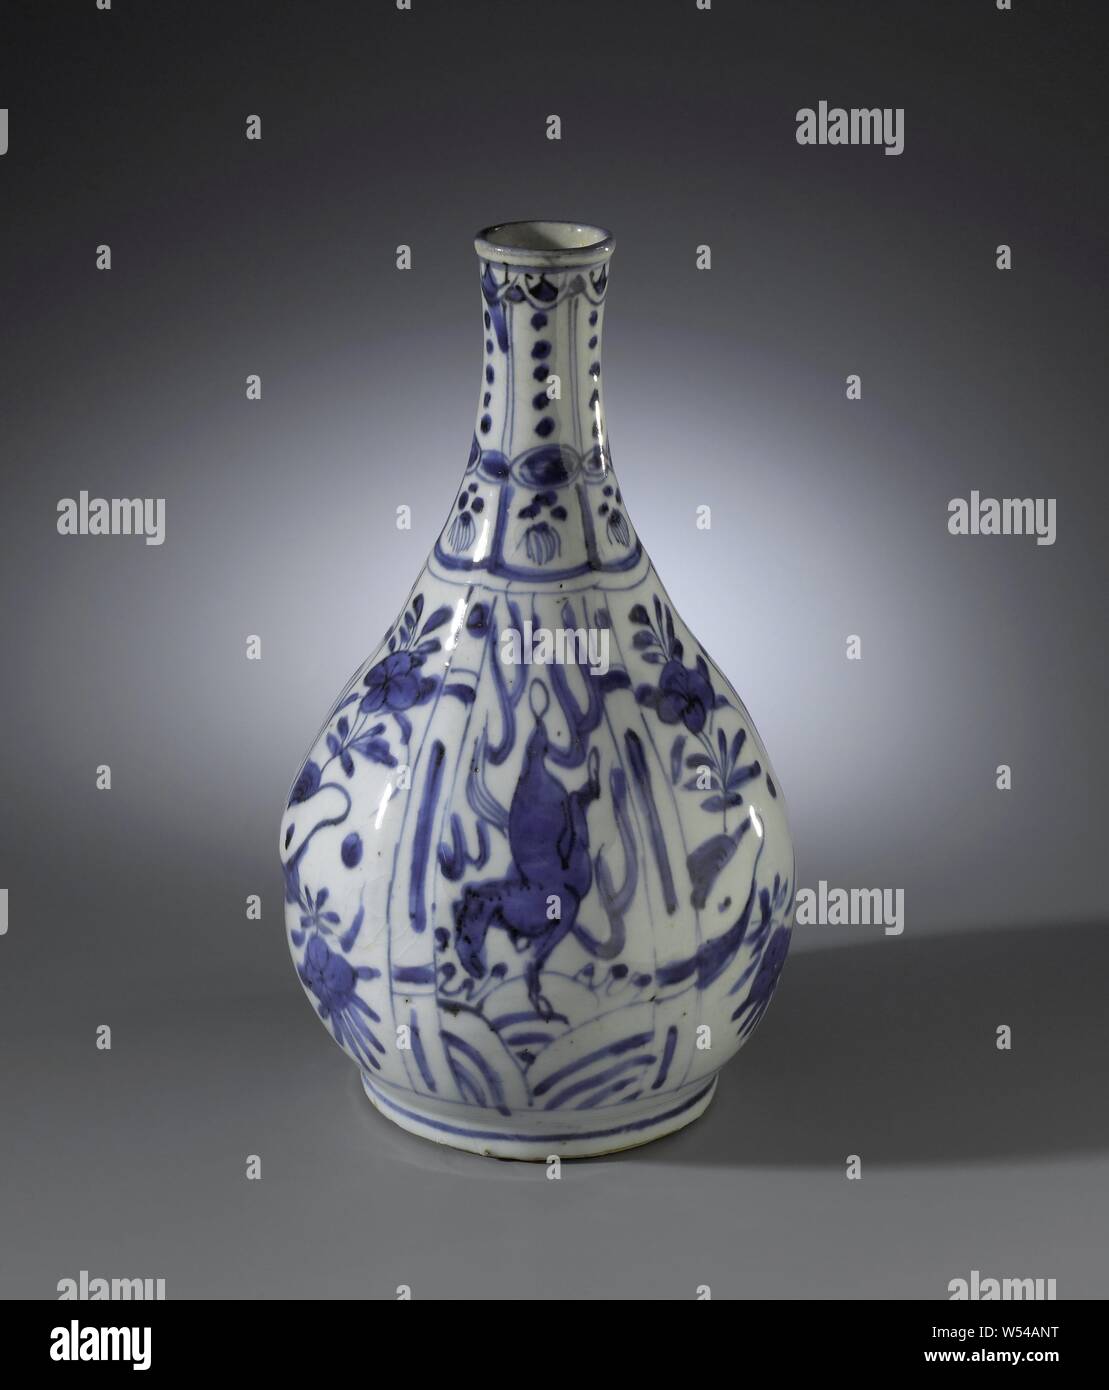 Pear-shaped bottle vase with horses and flower sprays, Bottle-shaped porcelain vase with a pear-shaped body, painted in underglaze blue. The wall is divided into compartments with alternating galloping horses and flower sprays, on the neck a box decoration with dots and brushes. Cracked porcelain., anonymous, China, c. 1600 - c. 1649, Ming-dynasty (1368-1644) / Qing-dynasty (1644-1912) / Wanli-period (1573-1619) / Tianqi-period (1621-1627) / Chongzhen-period (1628-1644) / Shunzhi-period (1644-1661), porcelain (material), glaze, cobalt (mineral), vitrification, h 26.2 cm d 3.9 cm d 16 cm d 10.7 Stock Photo